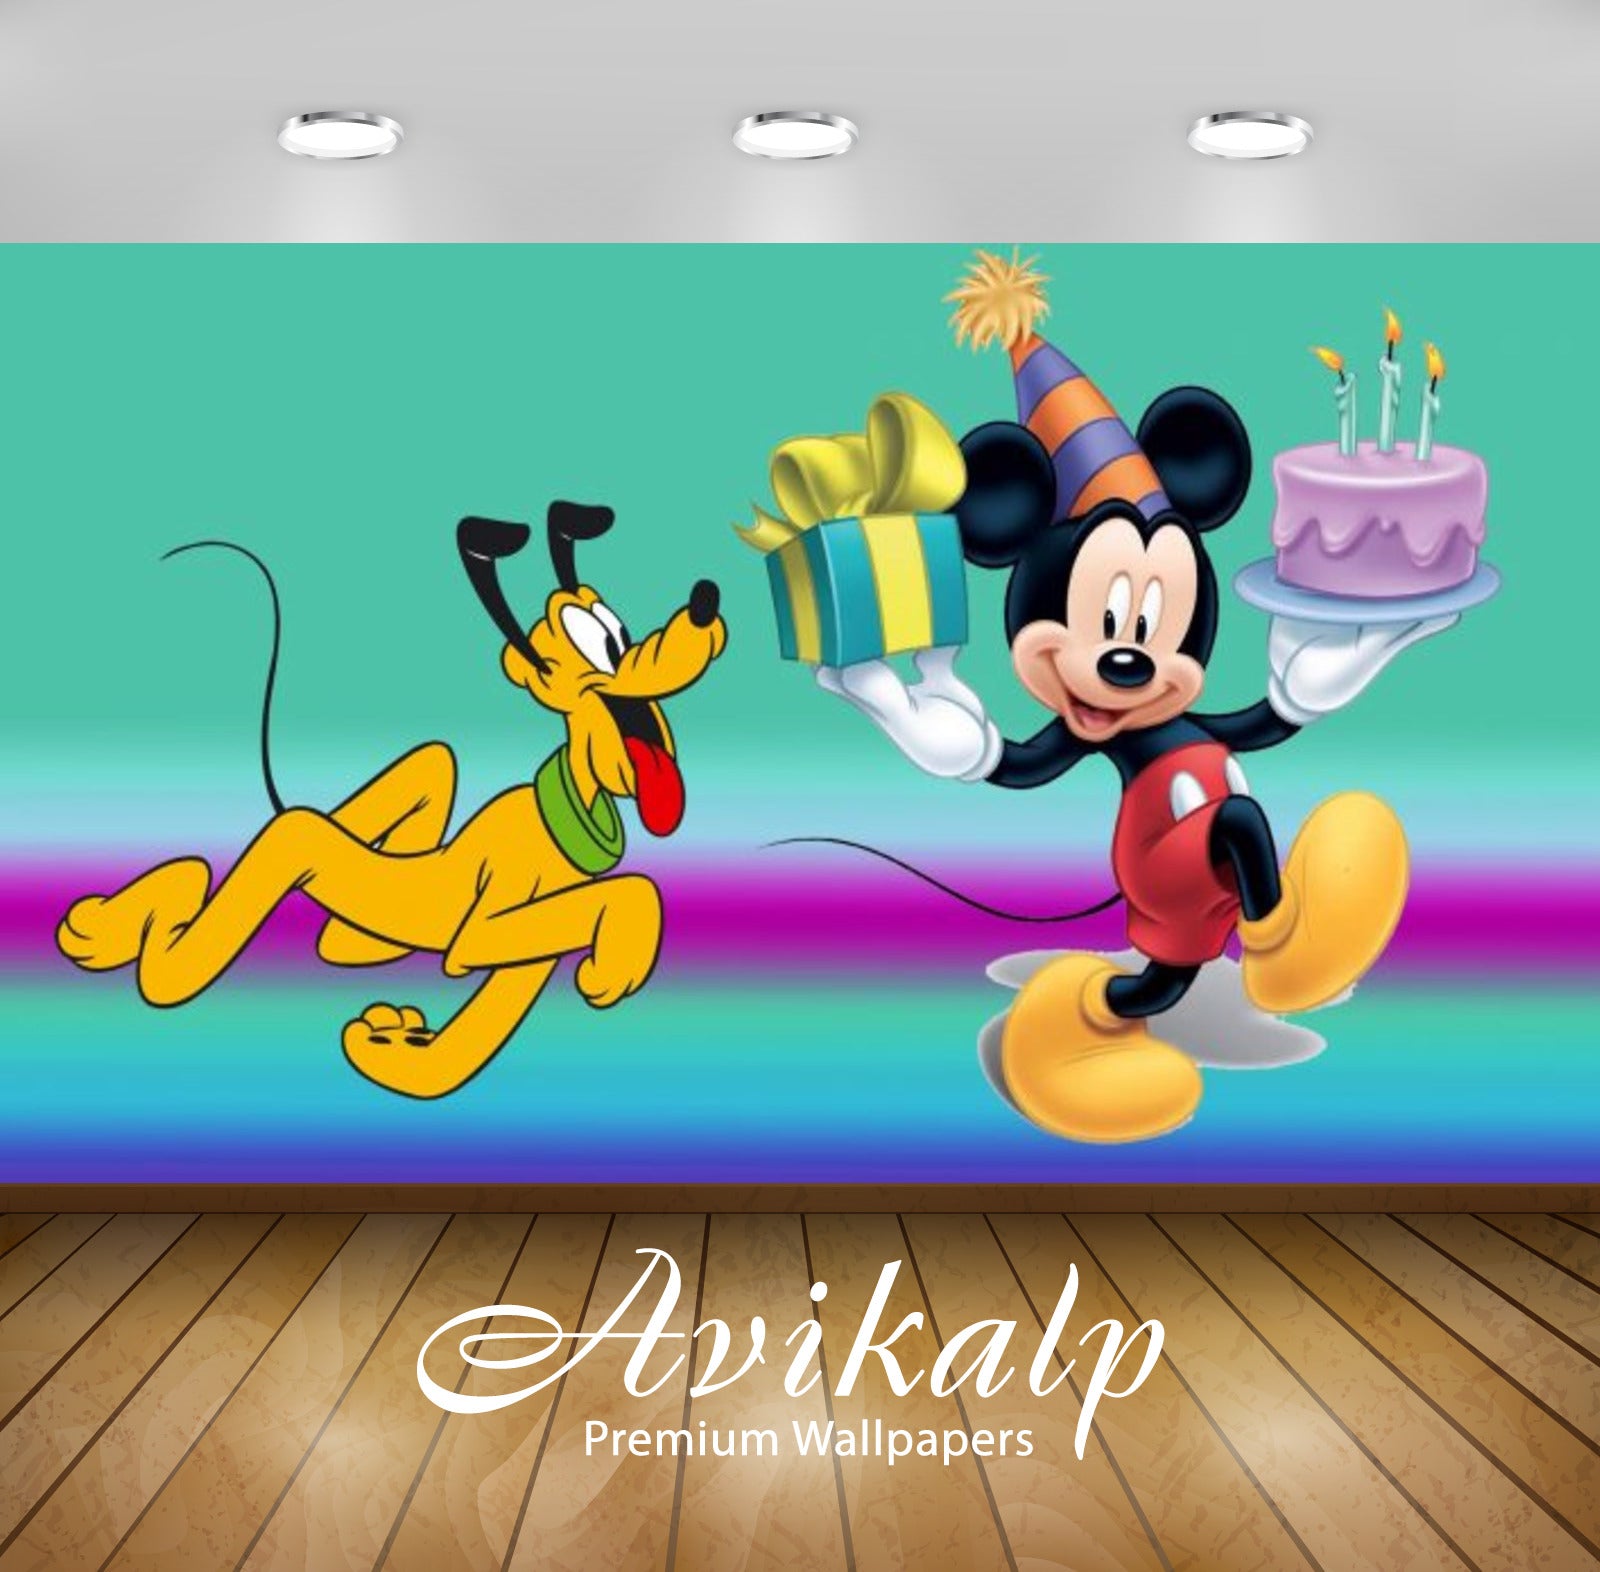 Avikalp Exclusive Awi2102 Mickey Mouse And Pluto Birthday Cake Celebration Gifts  Full HD Wallpapers